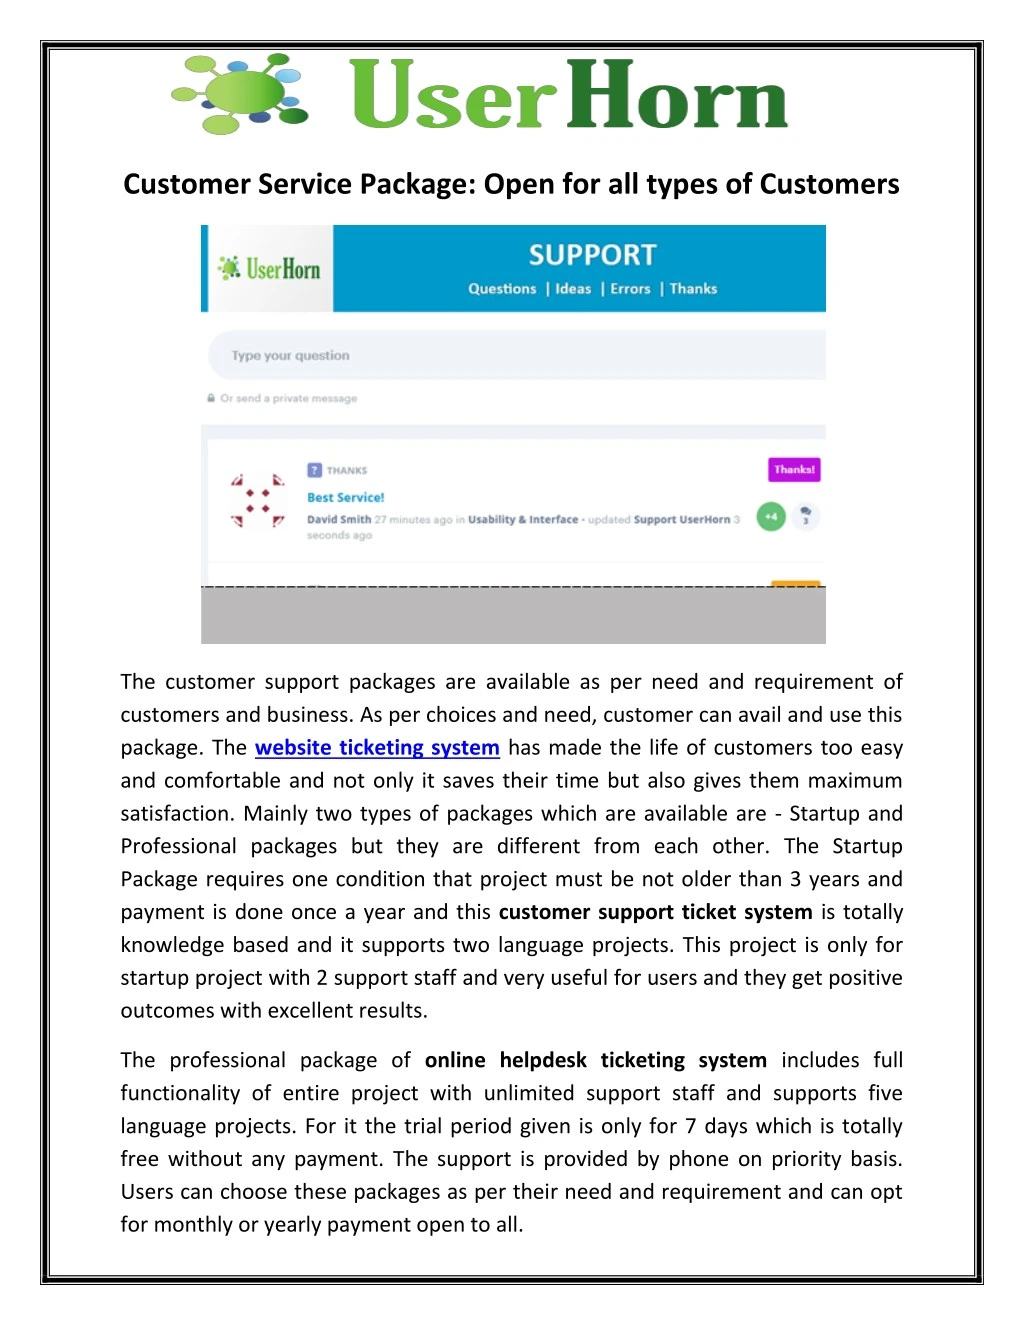 customer service package open for all types